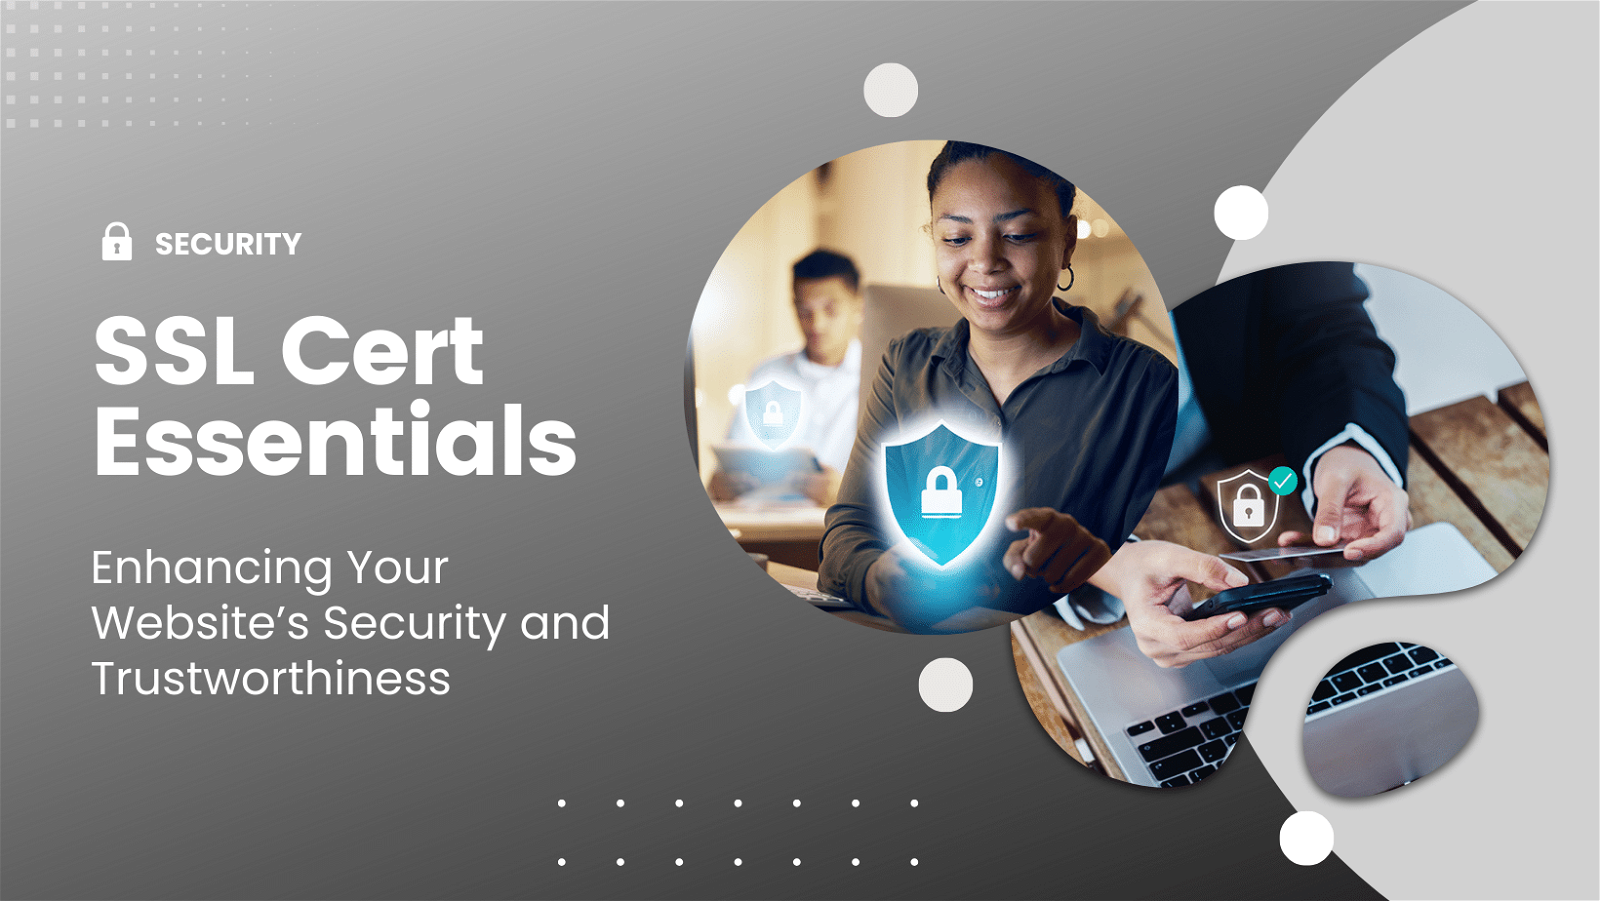 Graphic showcasing SSL Cert essentials, featuring a woman using a smartphone with security icons and a person using a laptop, emphasizing website security enhancement.